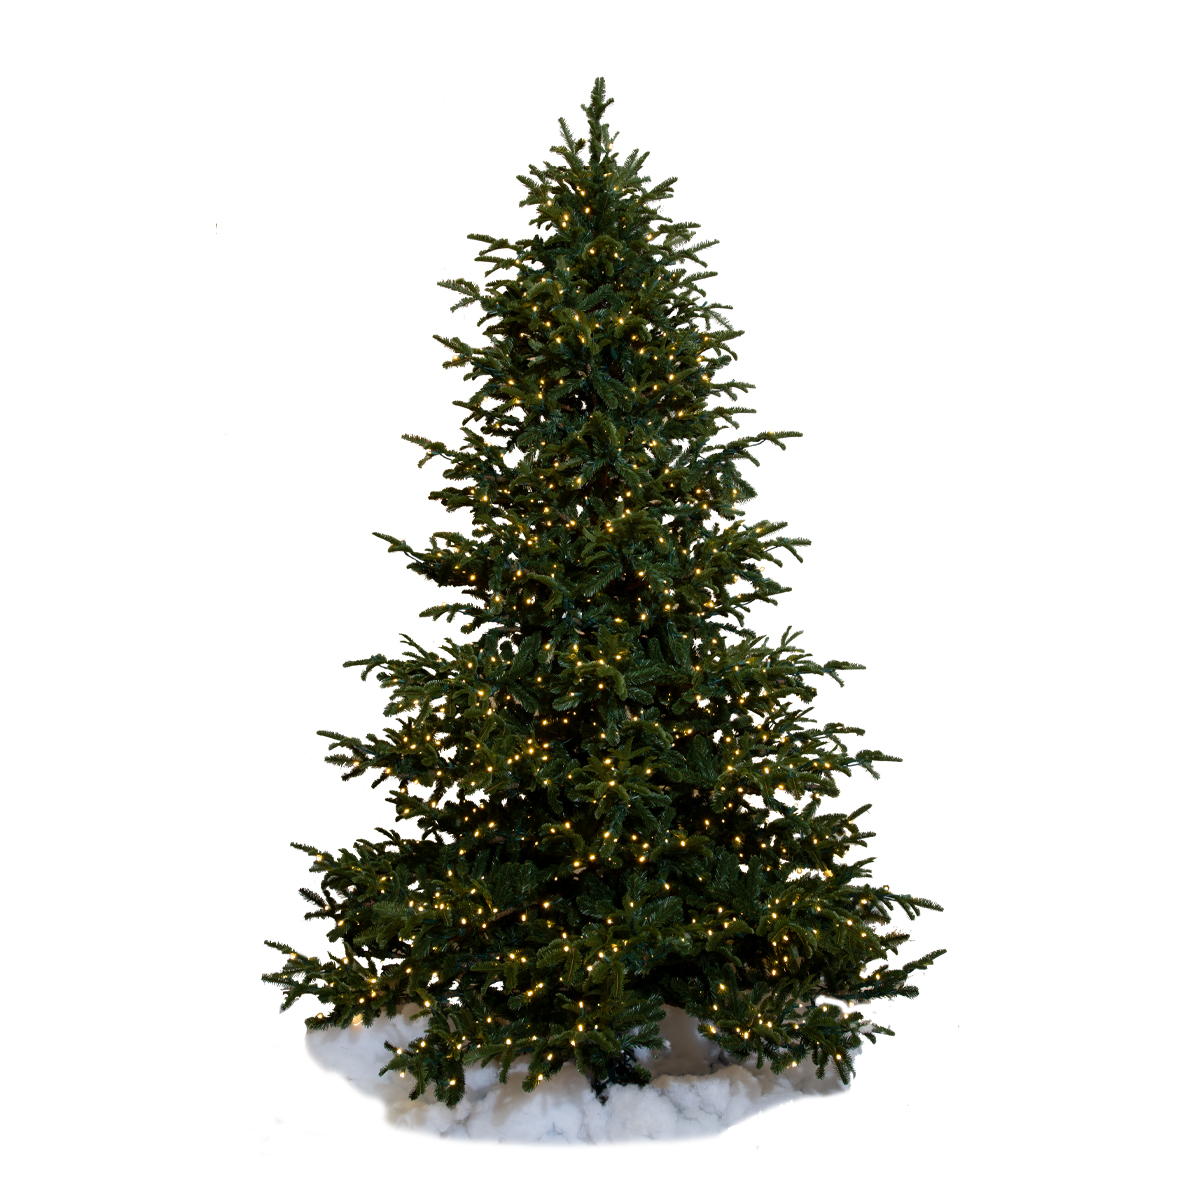 Star Fir Deluxe Christmas Tree - Warm White LED Glowing Lights - One-Plug Pole Power Supply - 7.5ft Tall